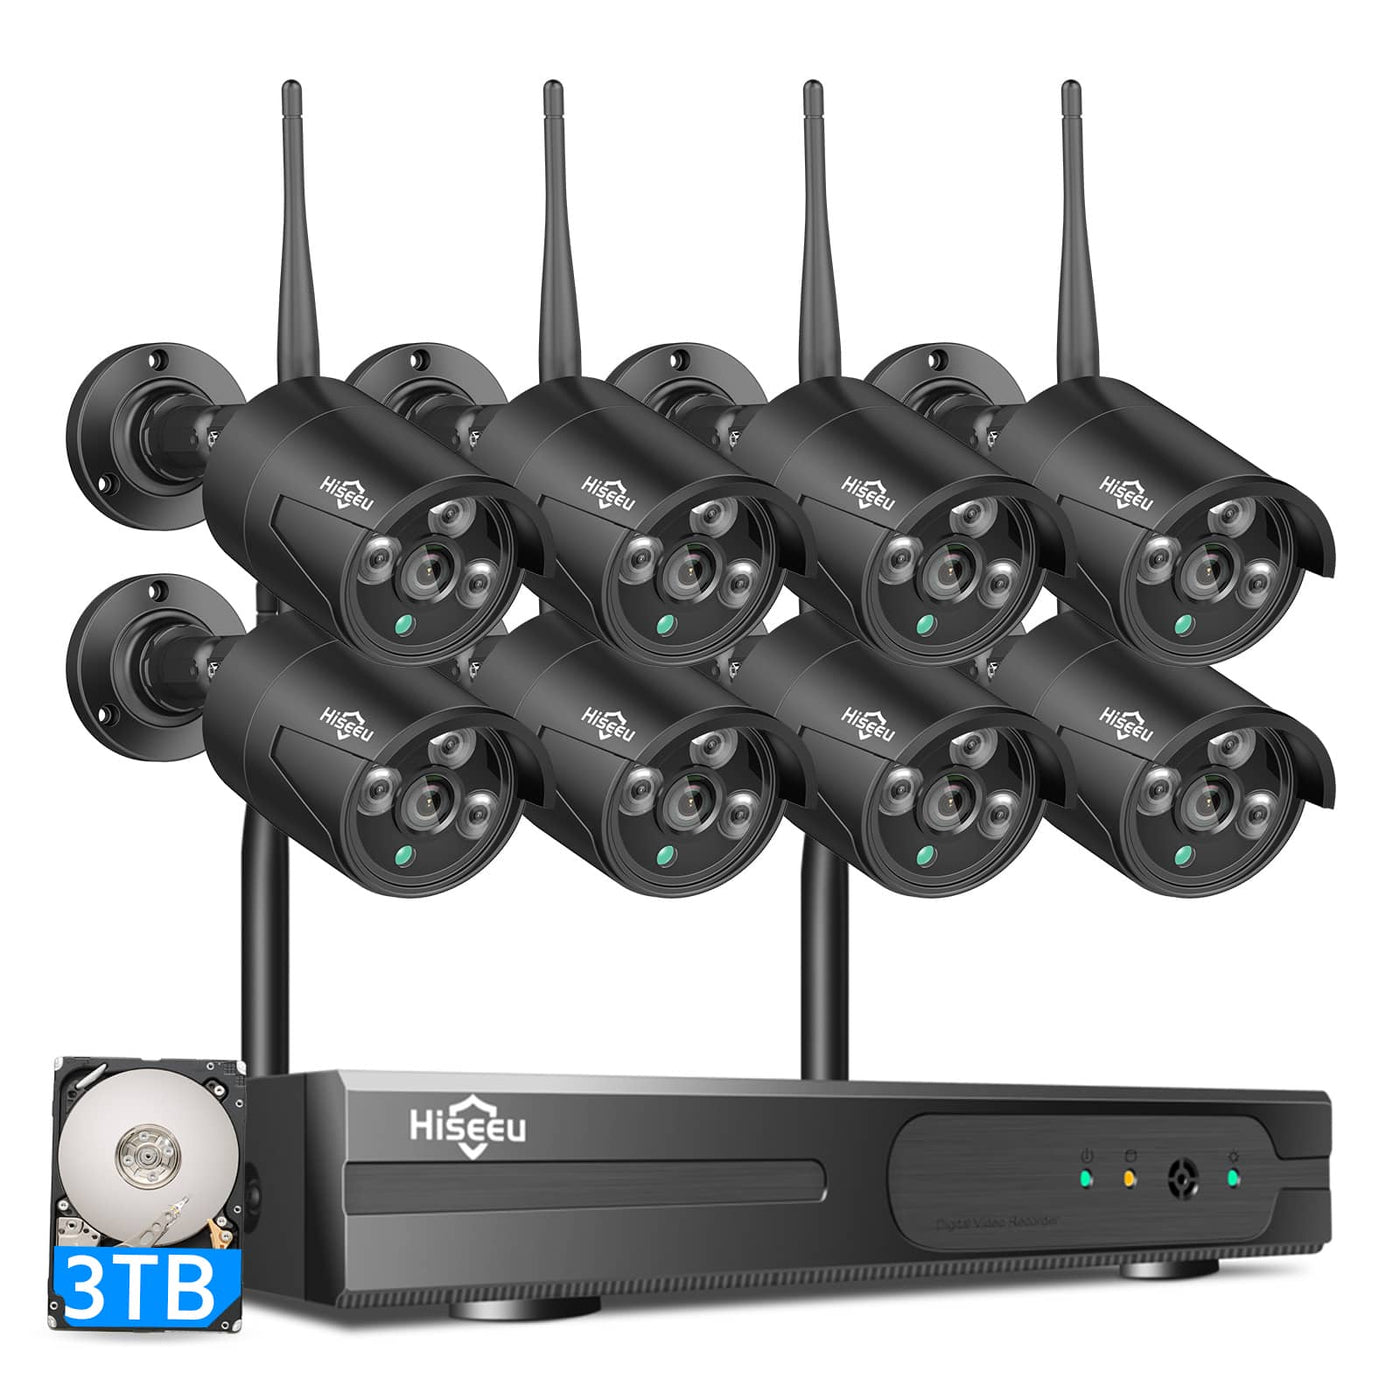 Hiseeu [Expandable 10CH,5MP]Wireless Security Camera System with 3TB Hard Drive with One-Way Audio,10 Channel NVR 8Pcs 5MP Night Vision WiFi Security Surveillance Cameras DC Power Home Outdoor